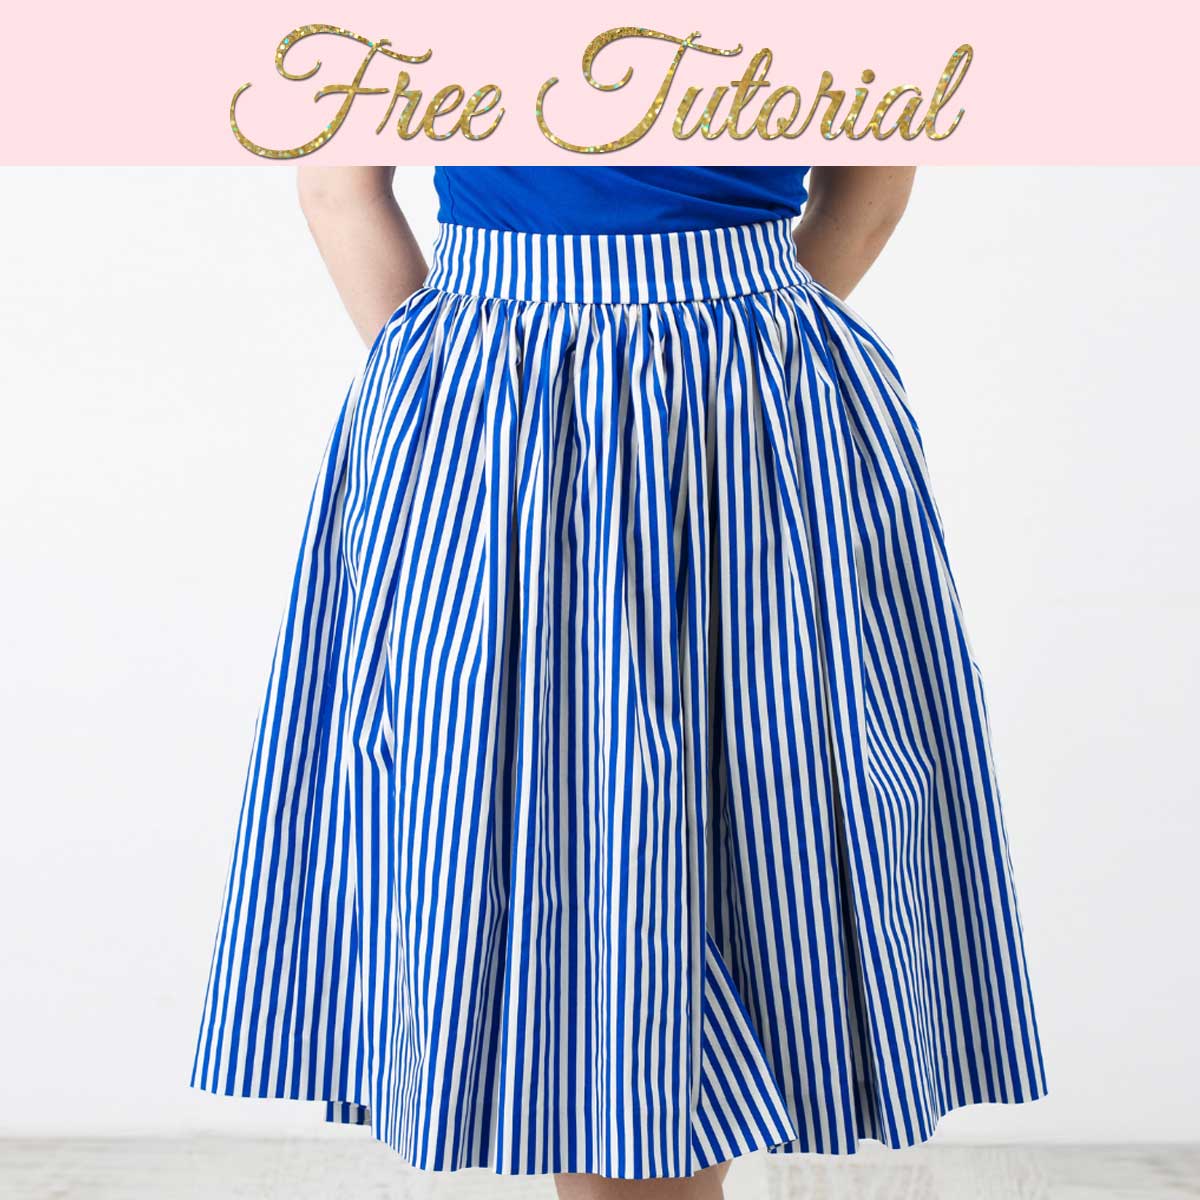 Collected skirt pattern